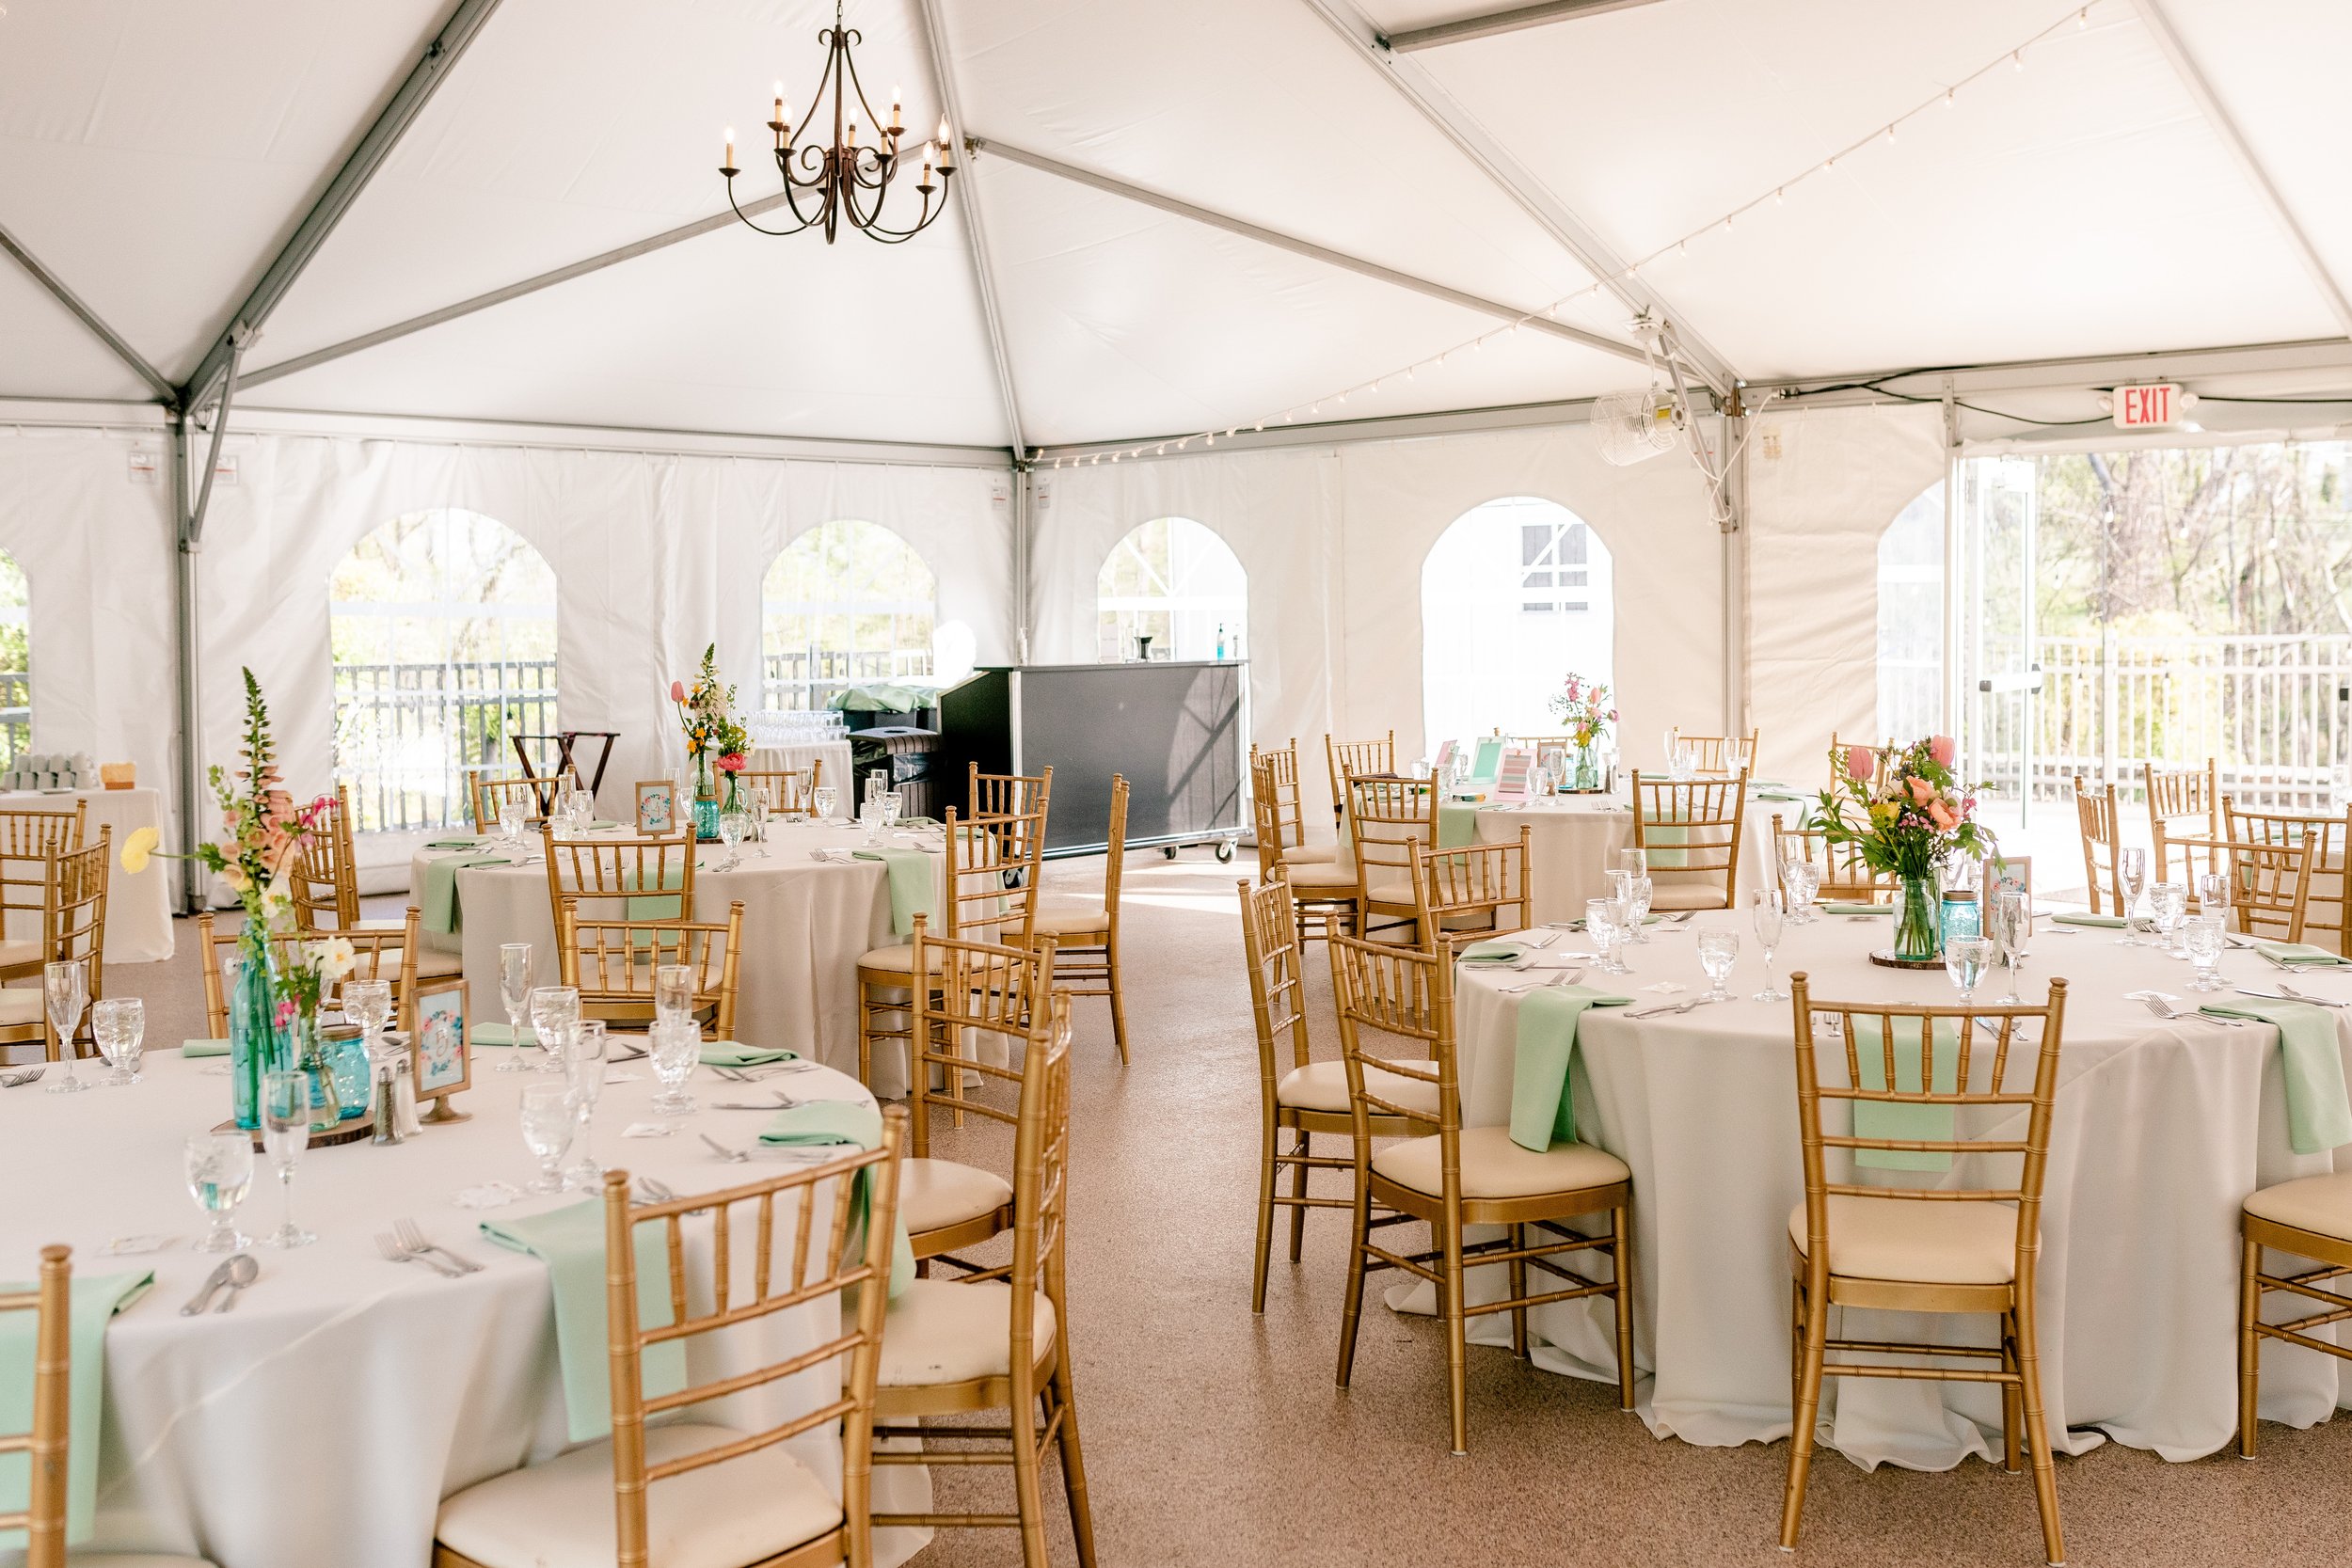 Tables set with colorful decor for a tented wedding at Rust Manor House in Loudoun County Virginia